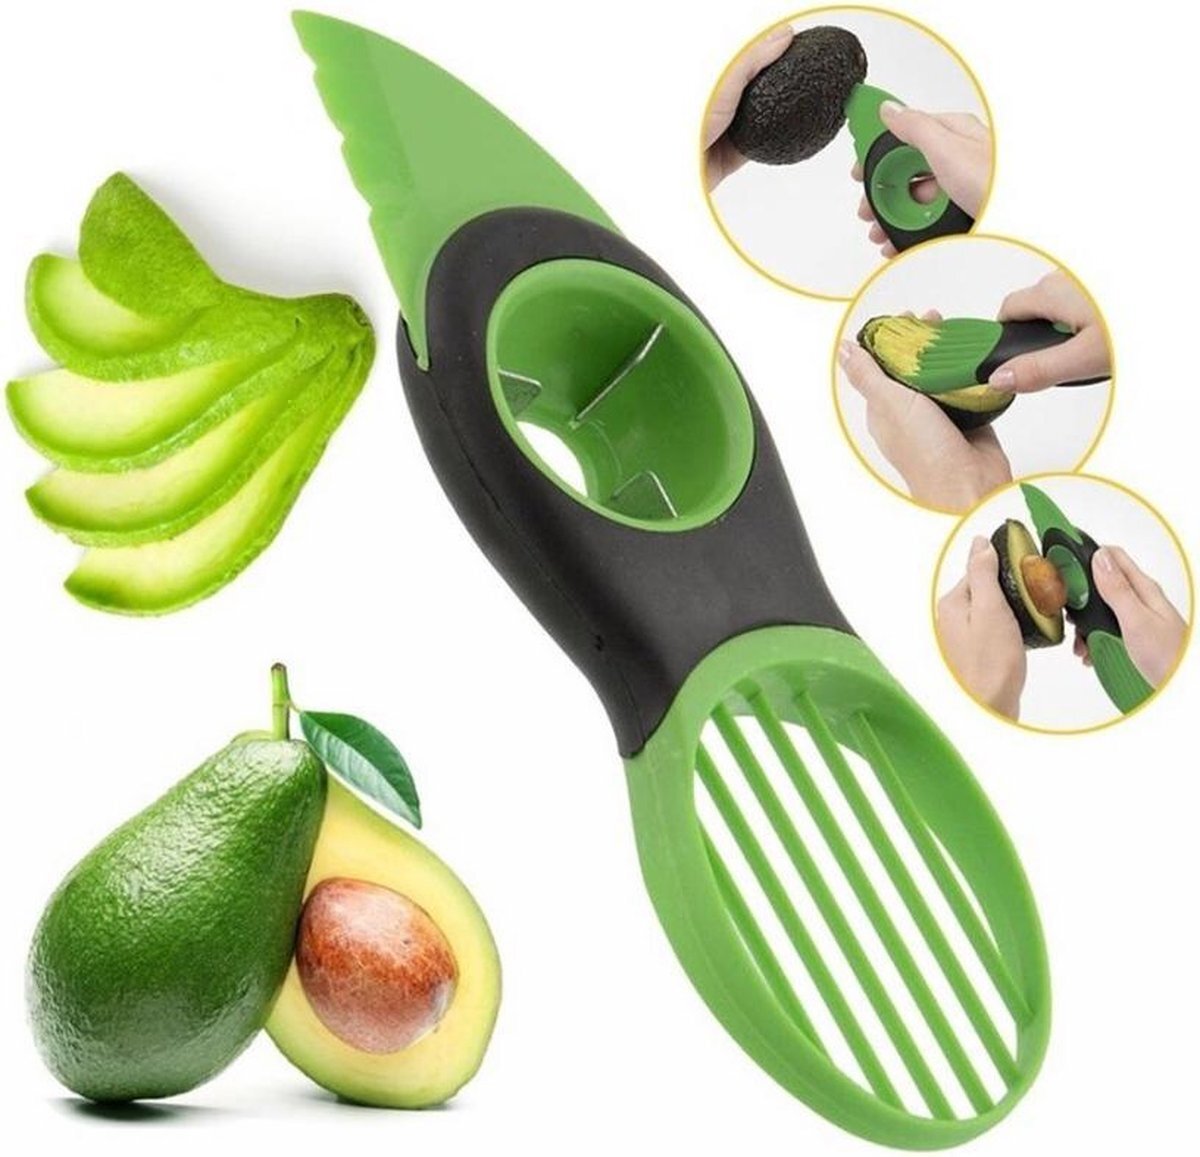 All-In-One Avocado Slicer Cutter